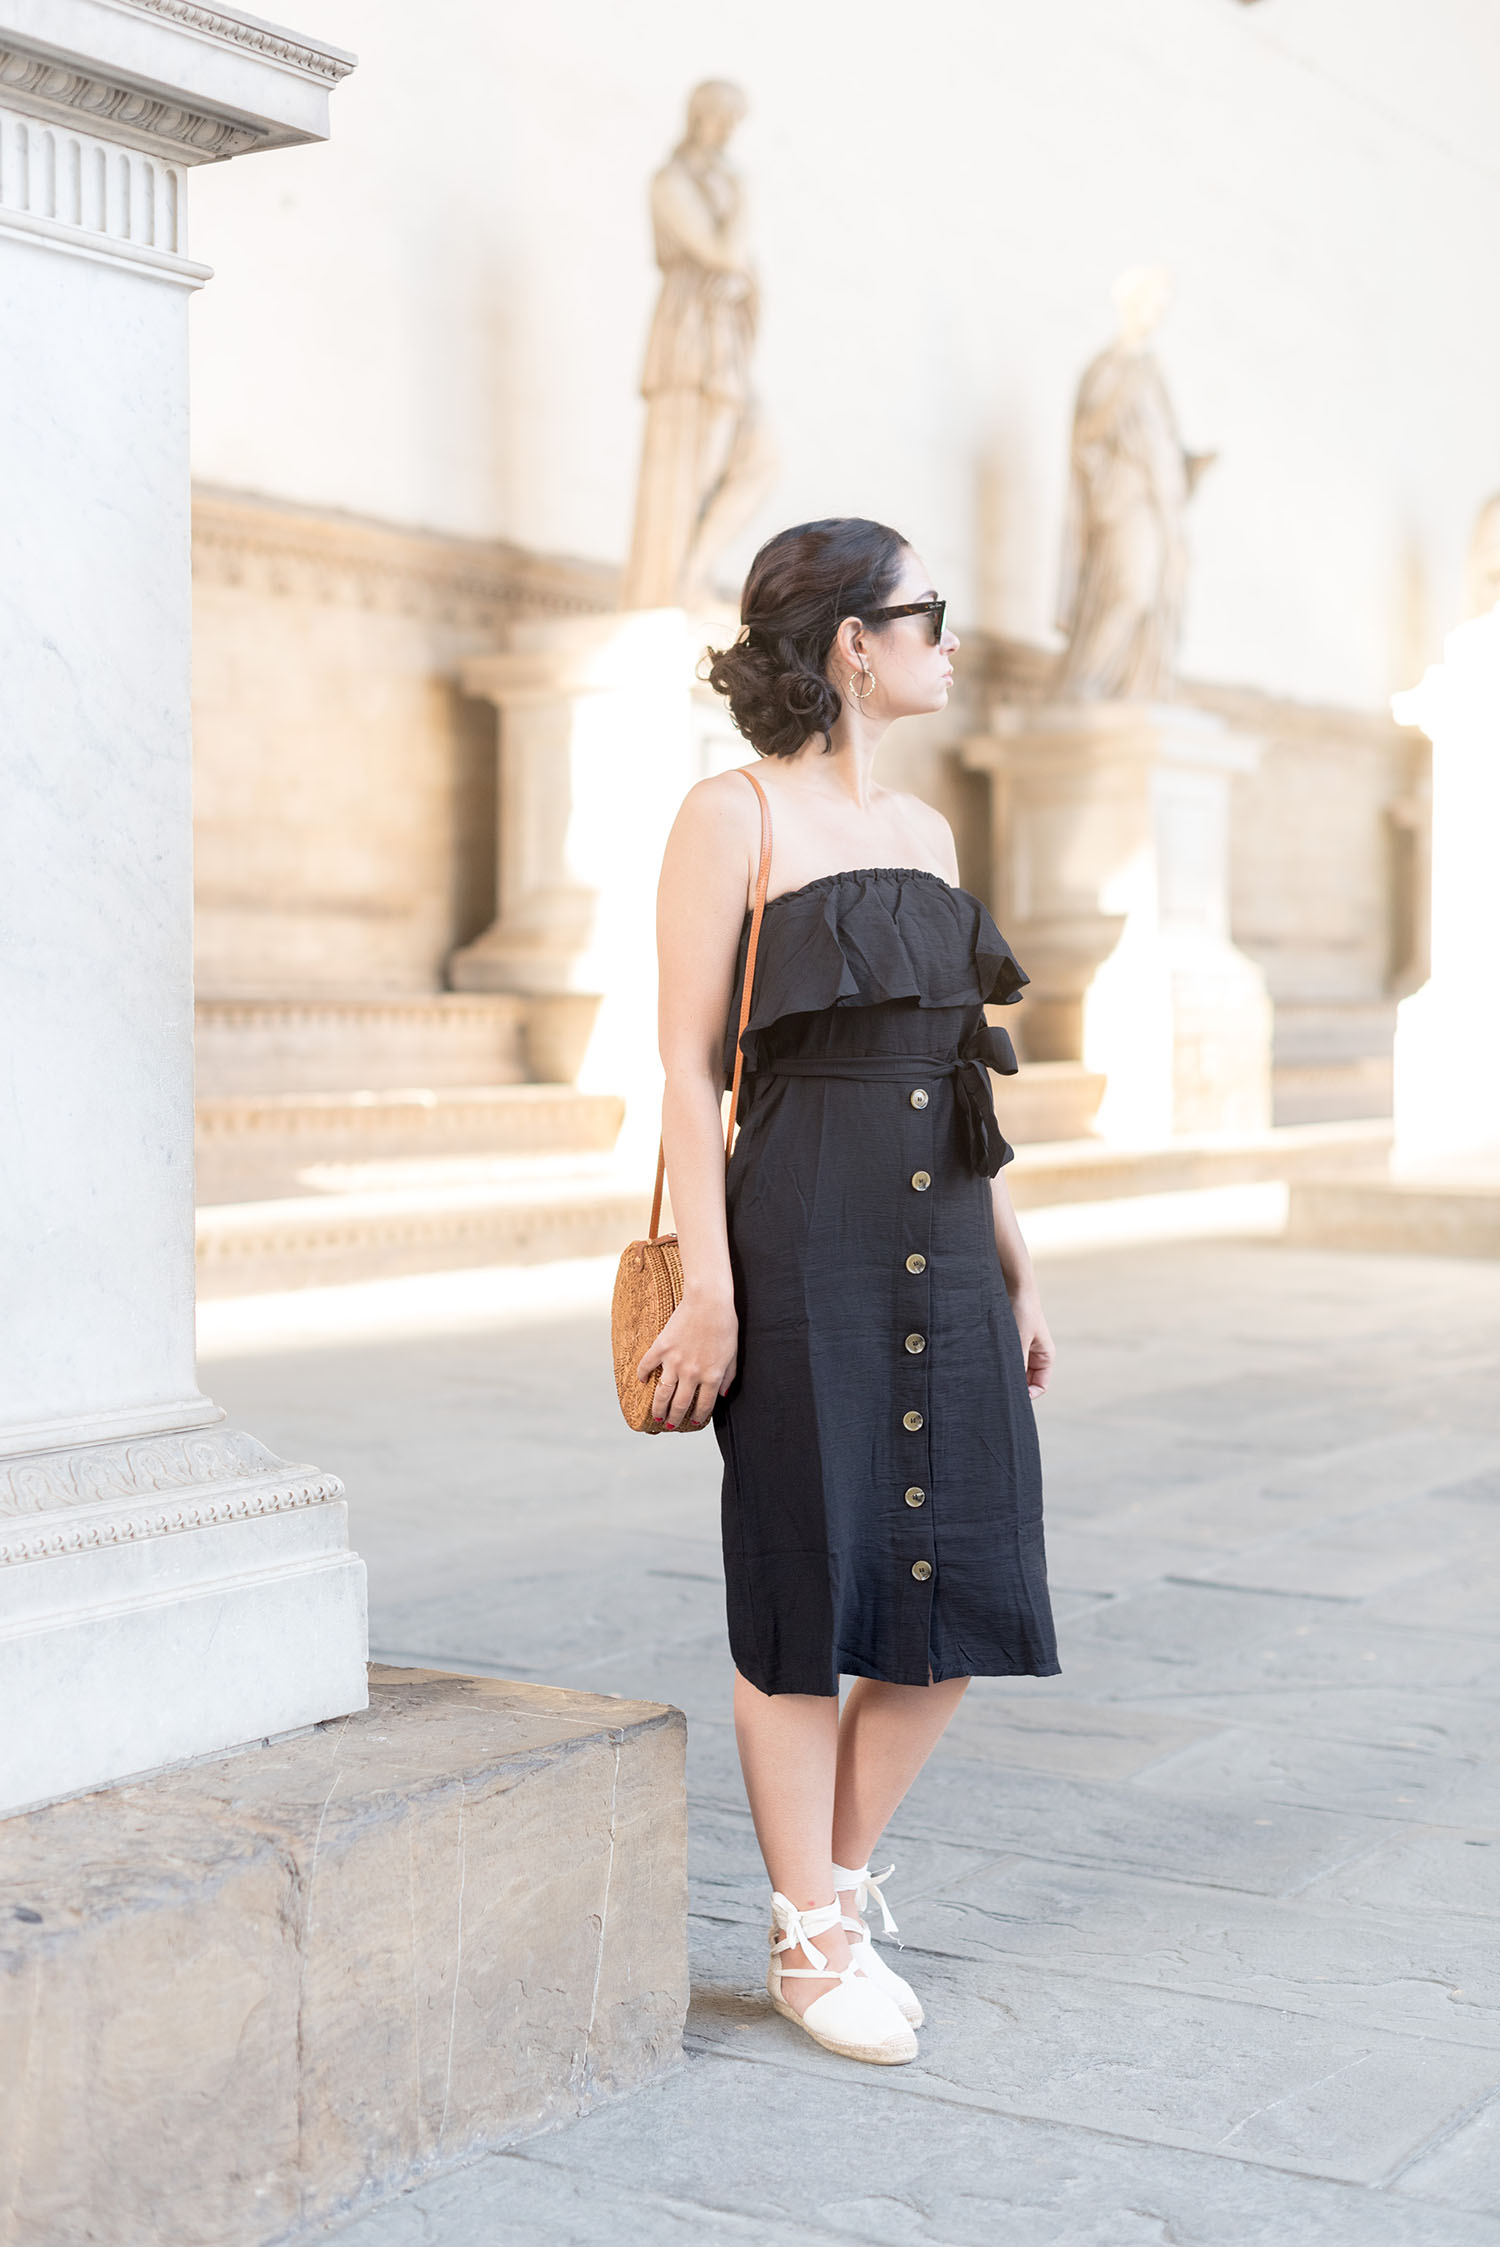 Top Winnipeg style blogger Cee Fardoe of Coco & Vera at the Uffizi Gallery in Florence, wearing a ShopUniques dress and Diego's espadrilles